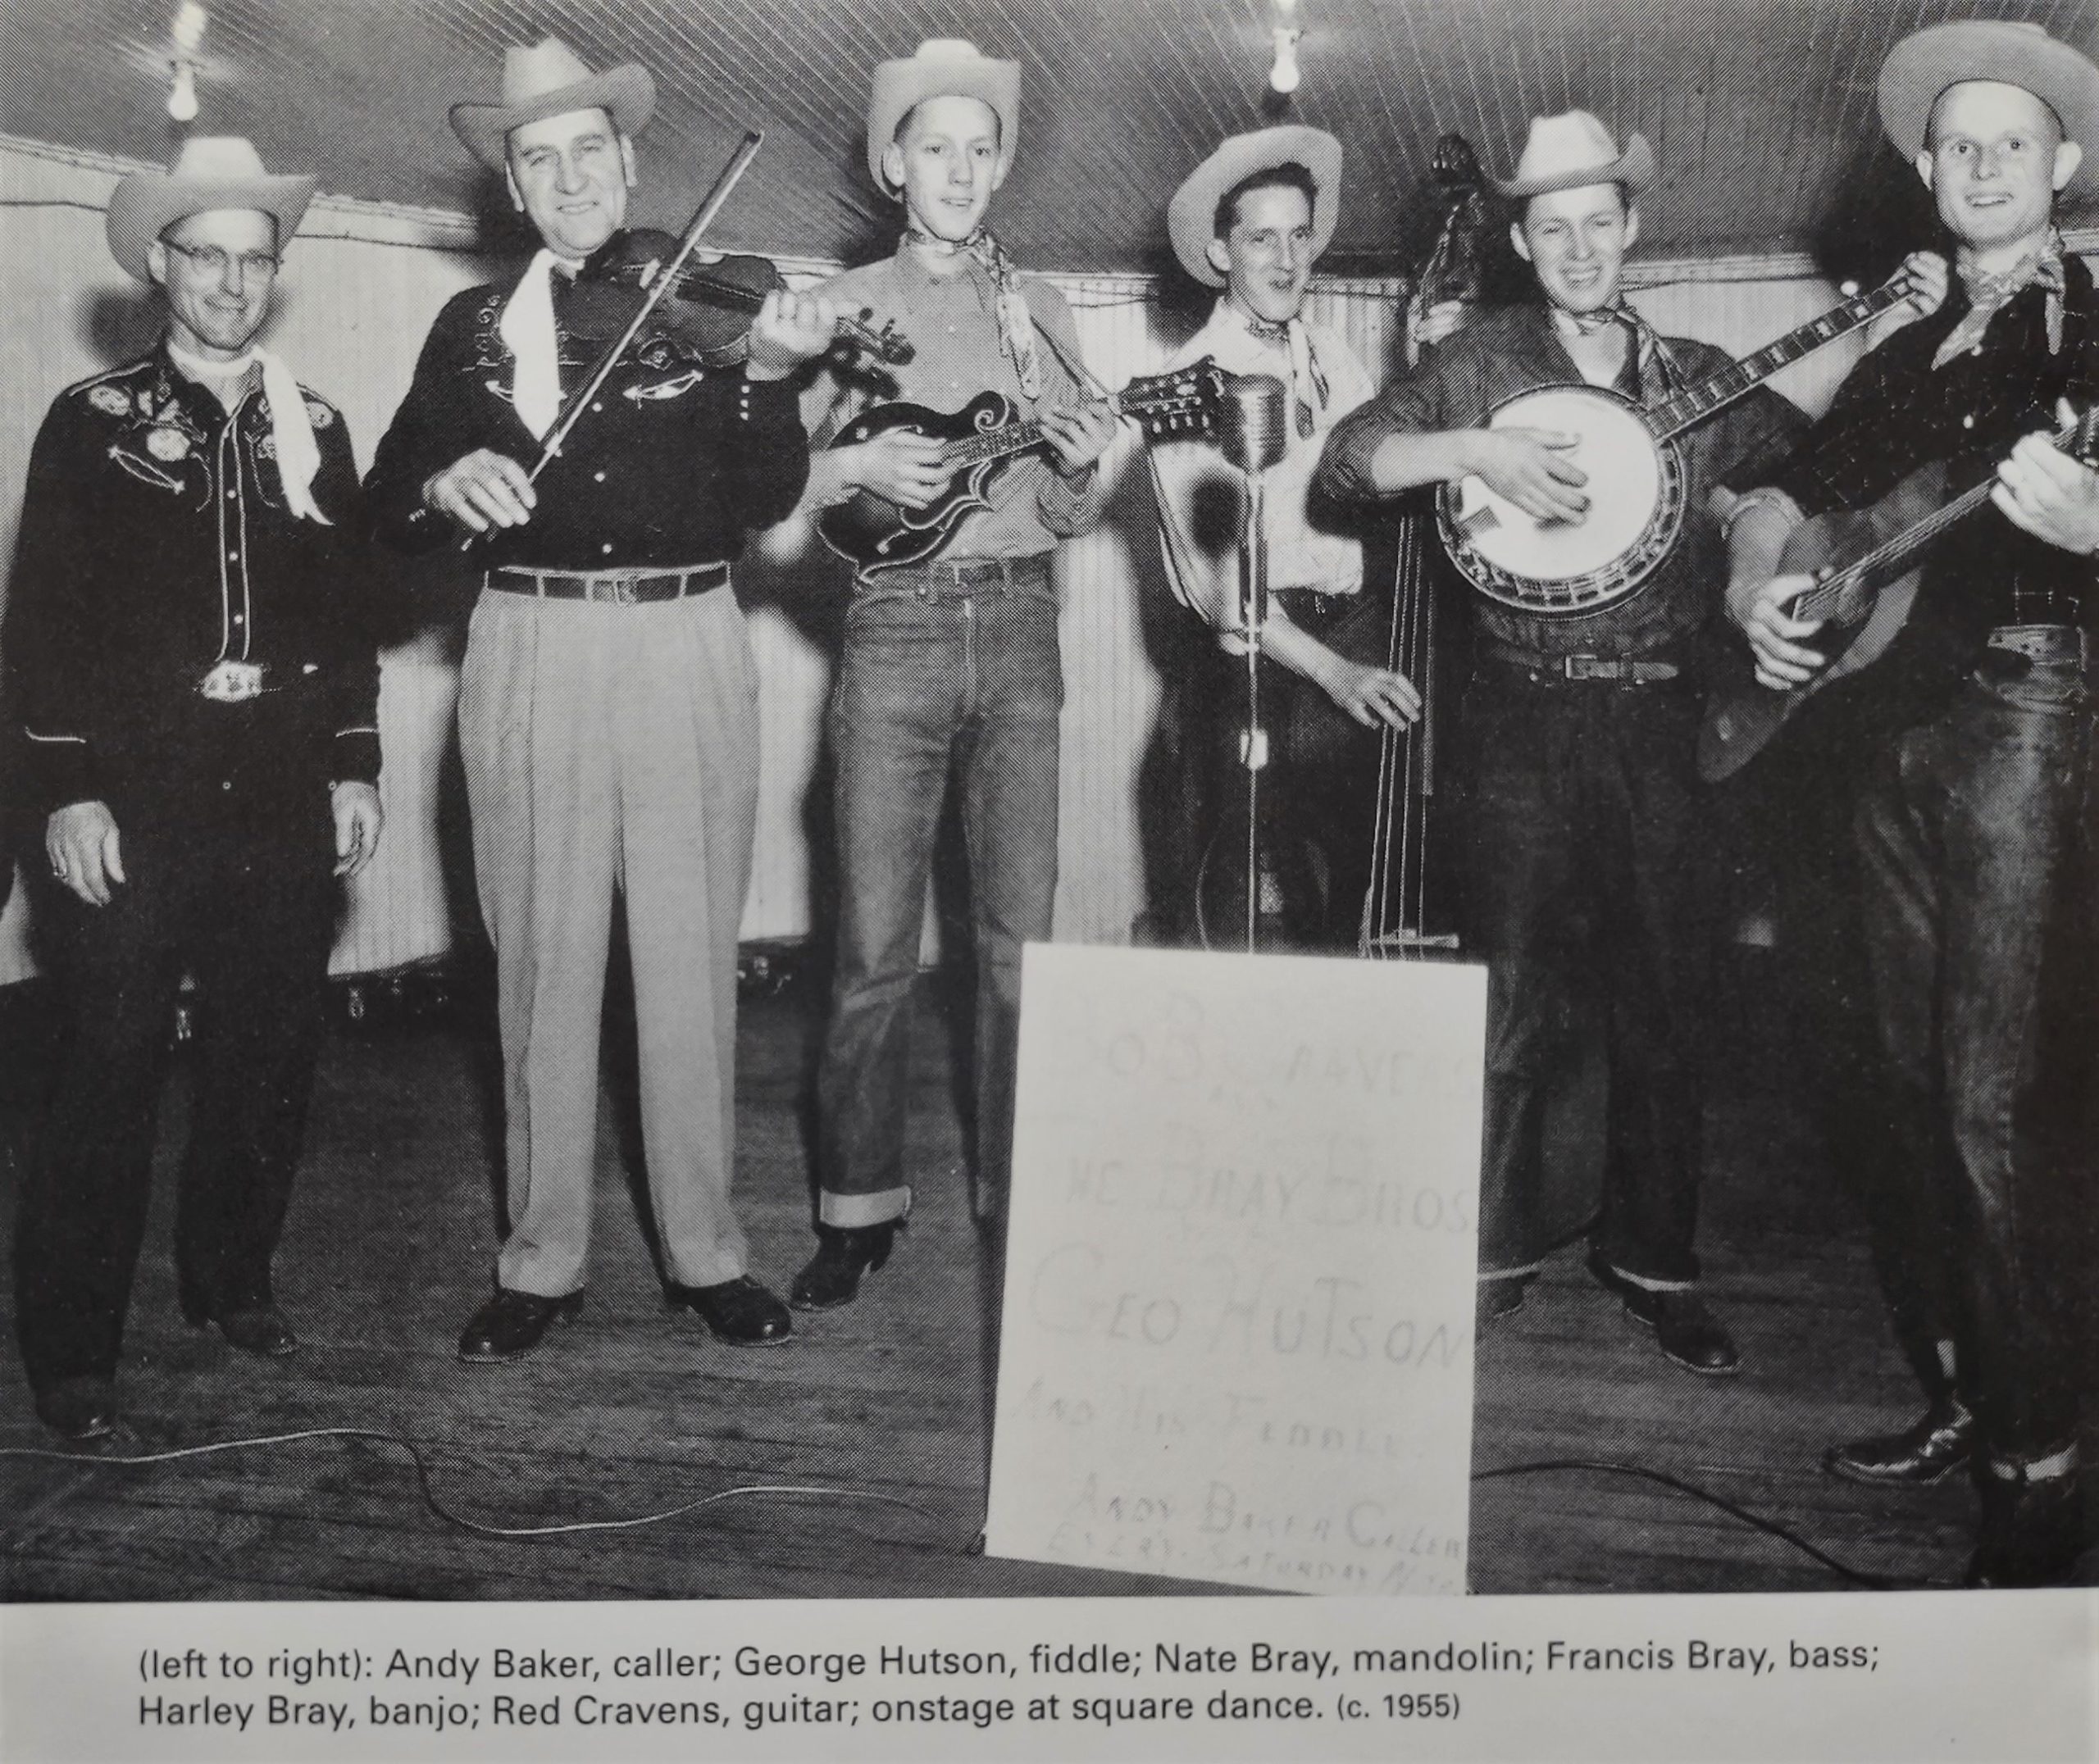 Photograph of an image of influential central Illinois-based bluegrass band The Bray Brothers.